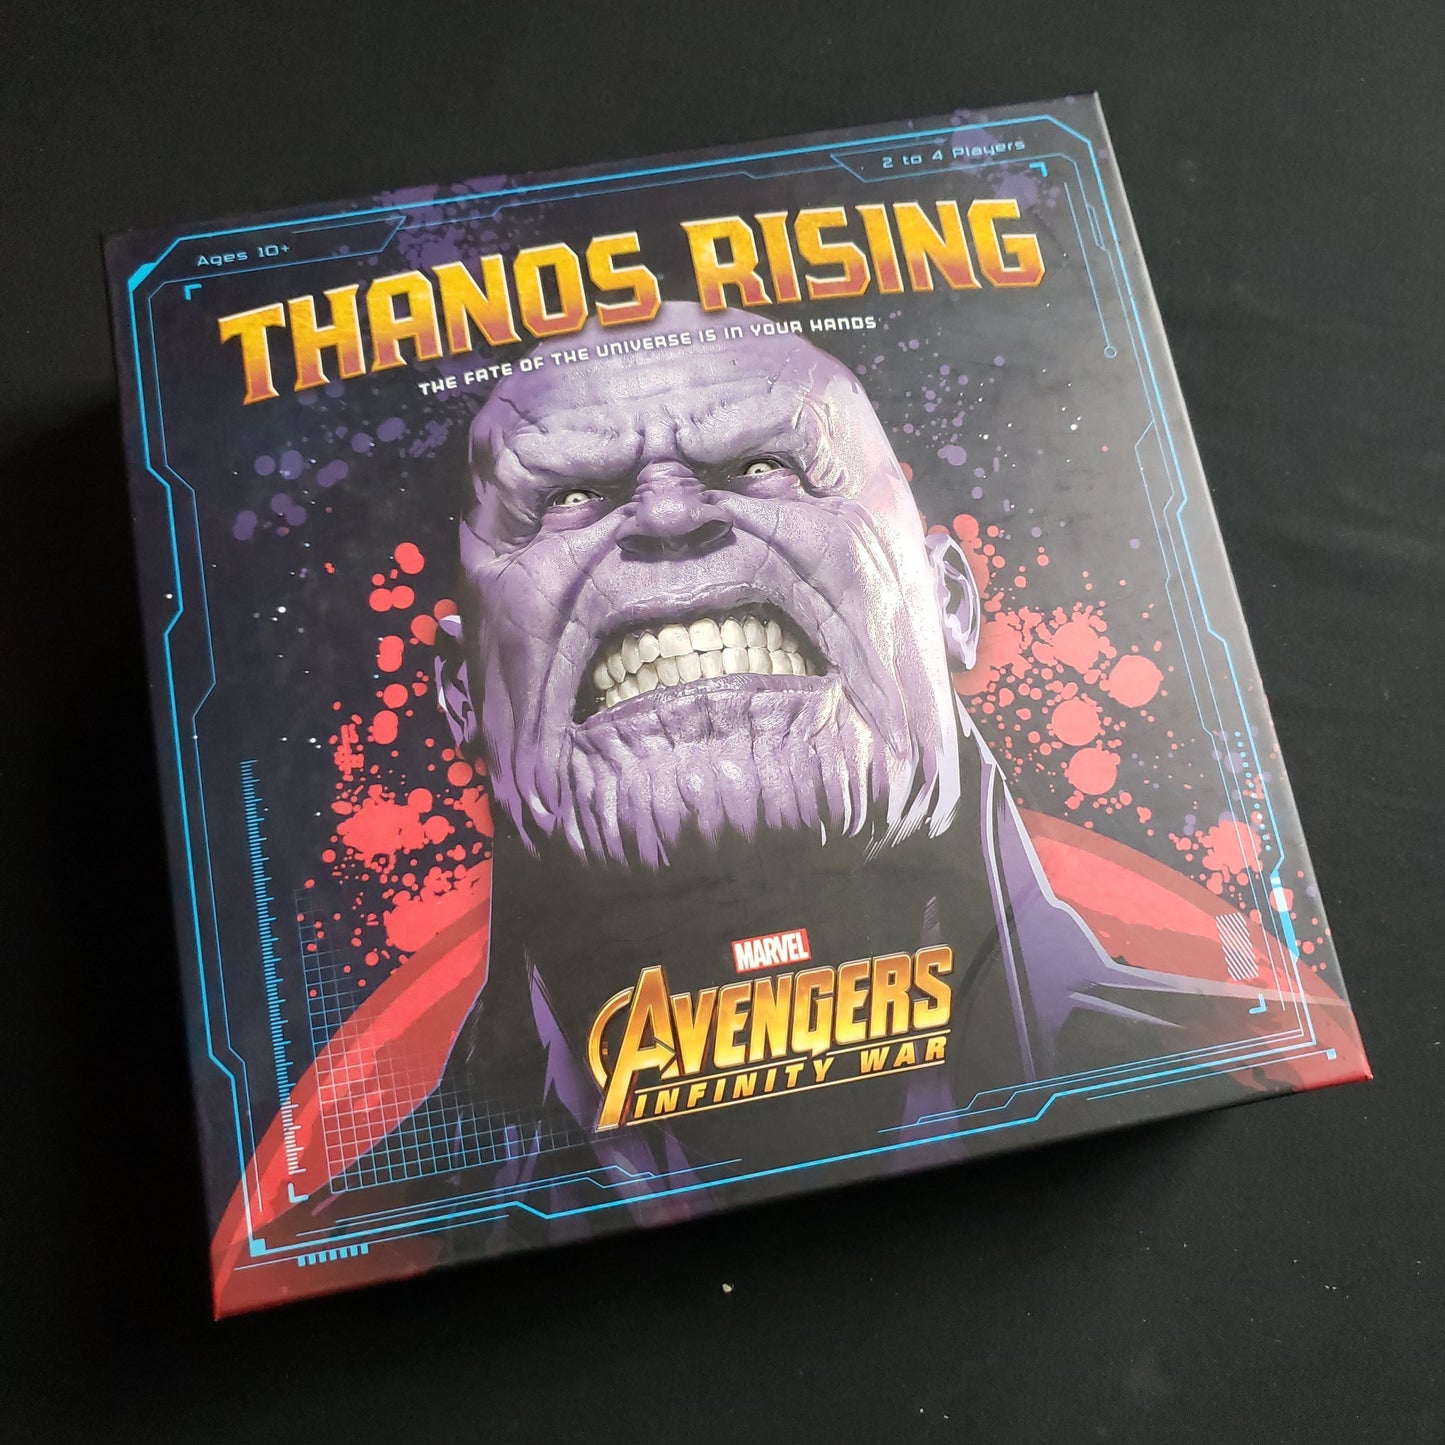 Image shows the front cover of the box of the Thanos Rising board game